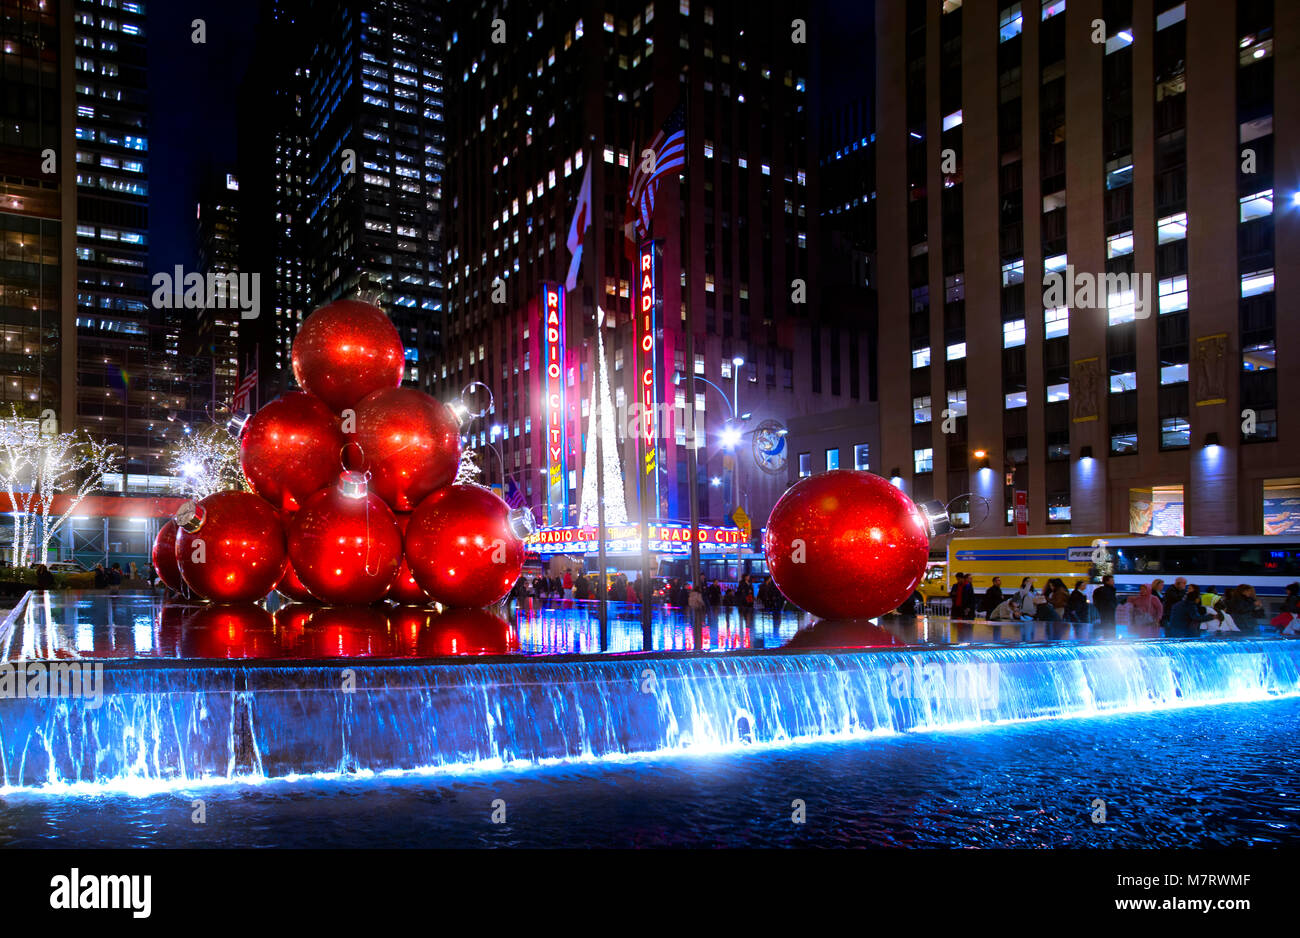 Rockefeller Center Natale.The Beautiful Christmas Decorations At Rockefeller Center In Stock Photo Alamy